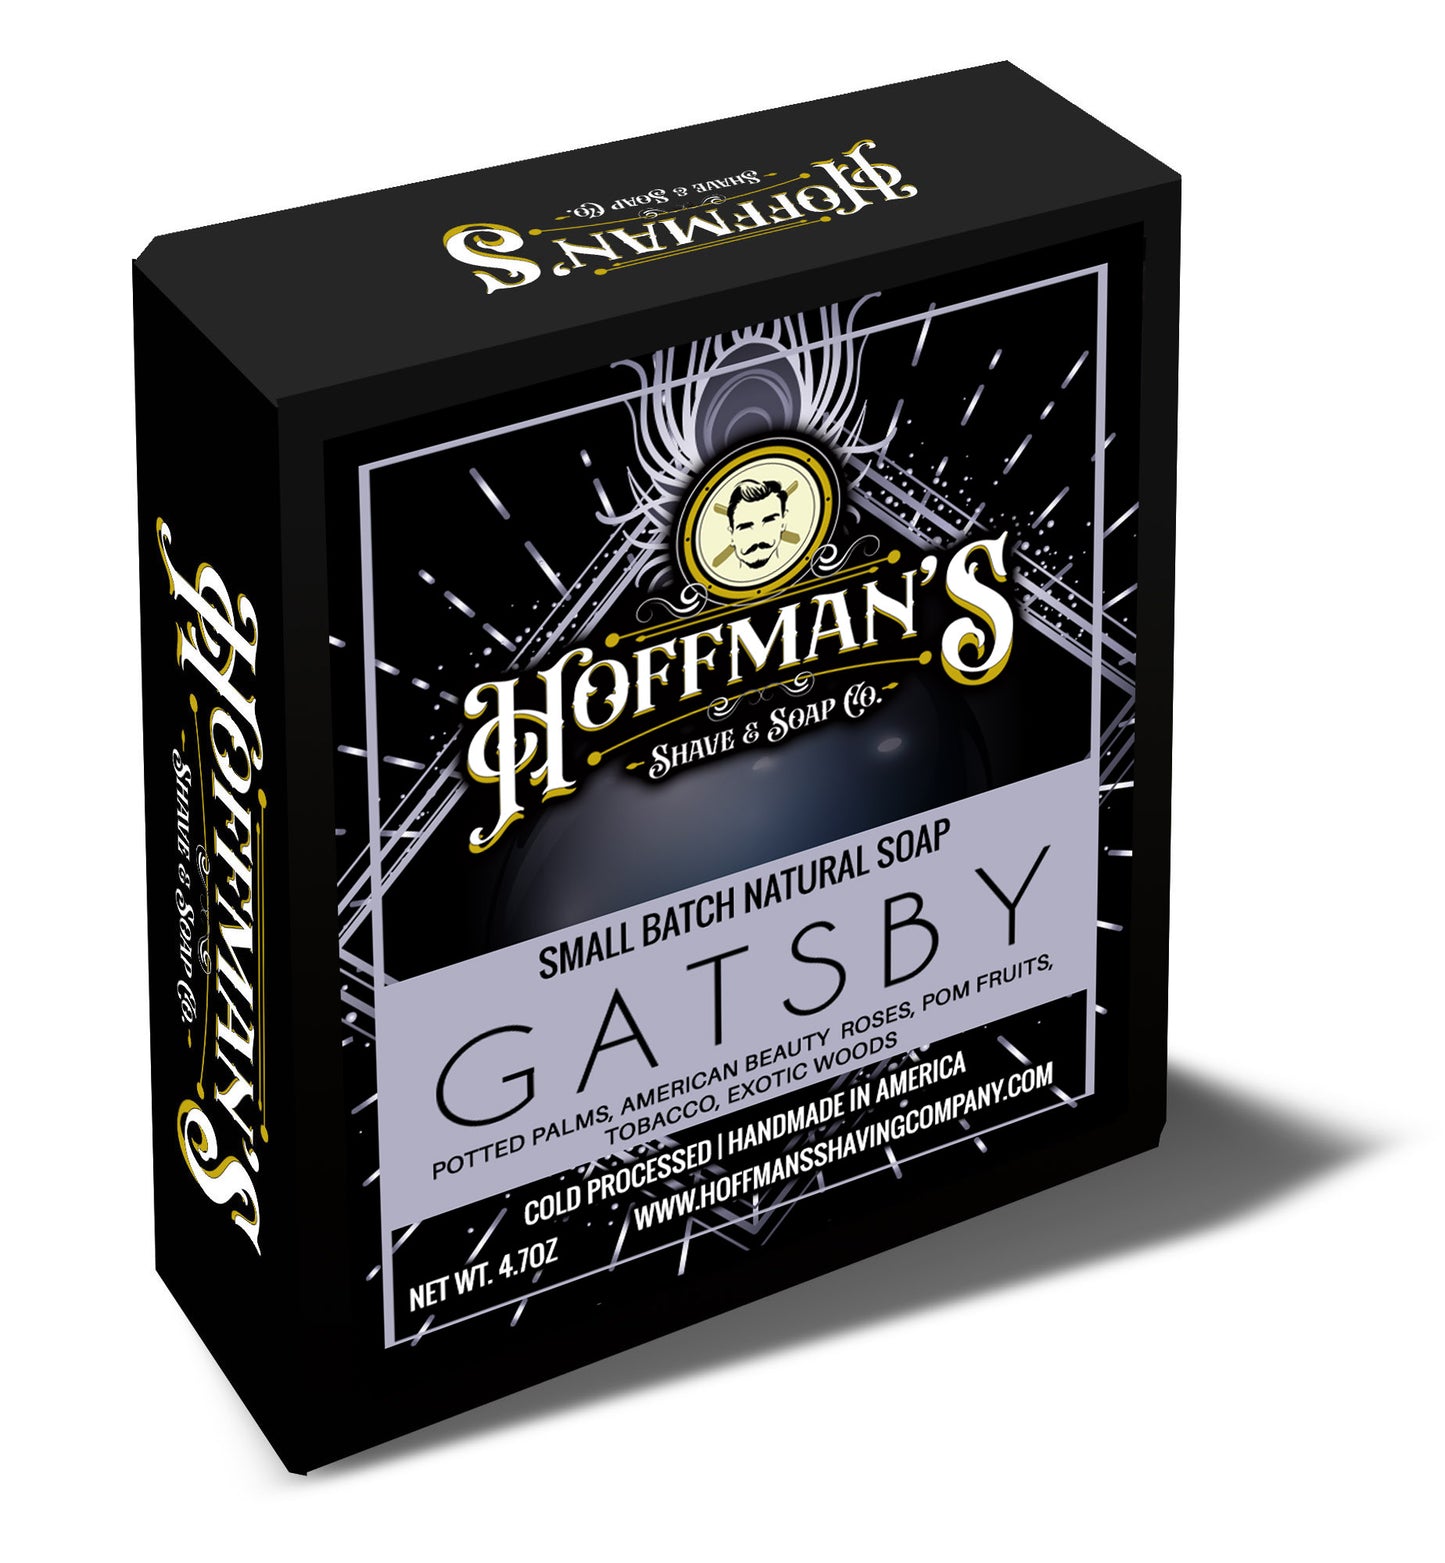 "Gatsby" (American Beauty Roses, Tobacco, Exotic Woods) Bar Soap